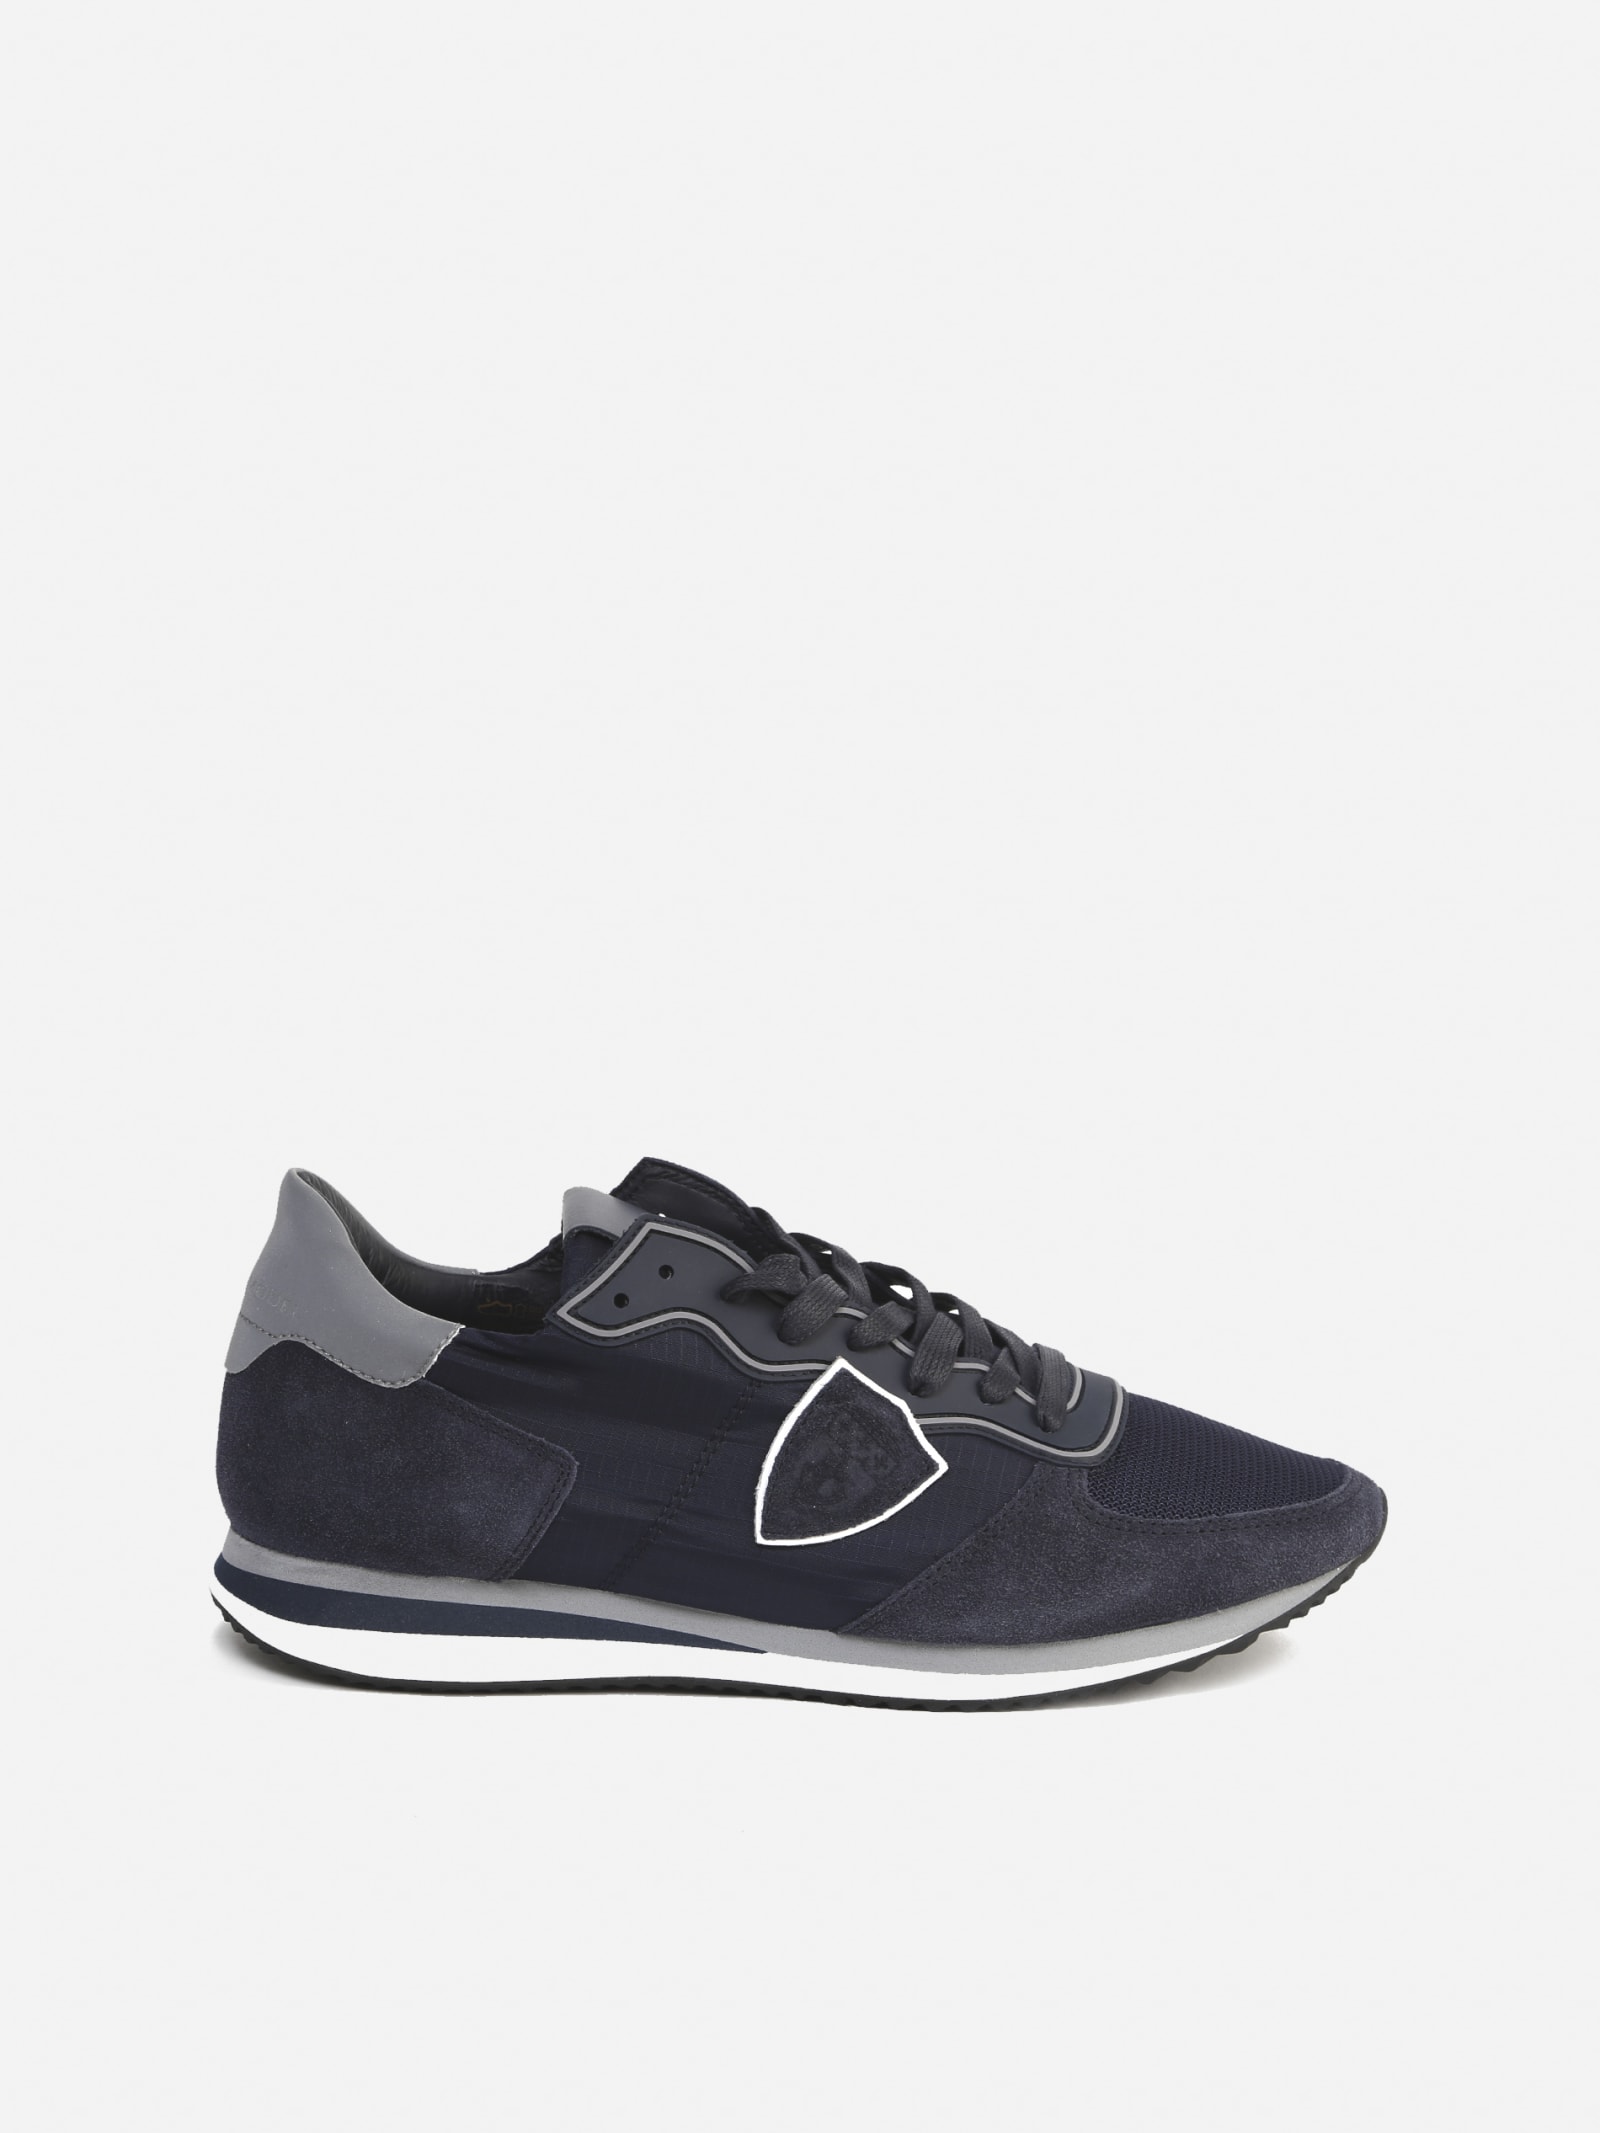 Philippe Model Trpx Veau Blue Sneaker In Suede And Nylon